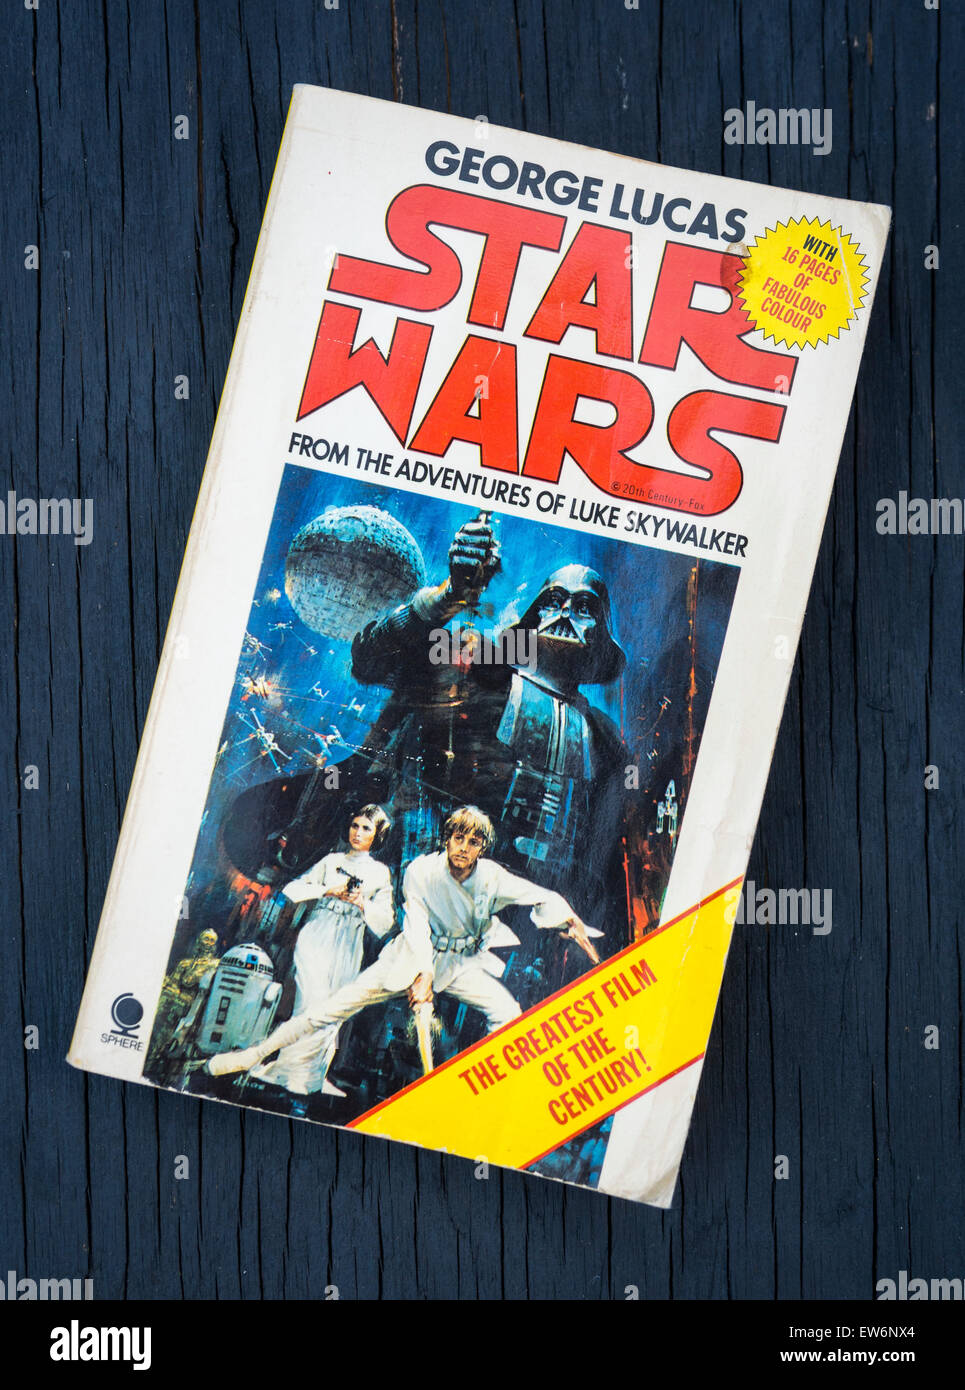 Star Wars Paperback Book 1977, Written by George Lucas Stock Photo - Alamy